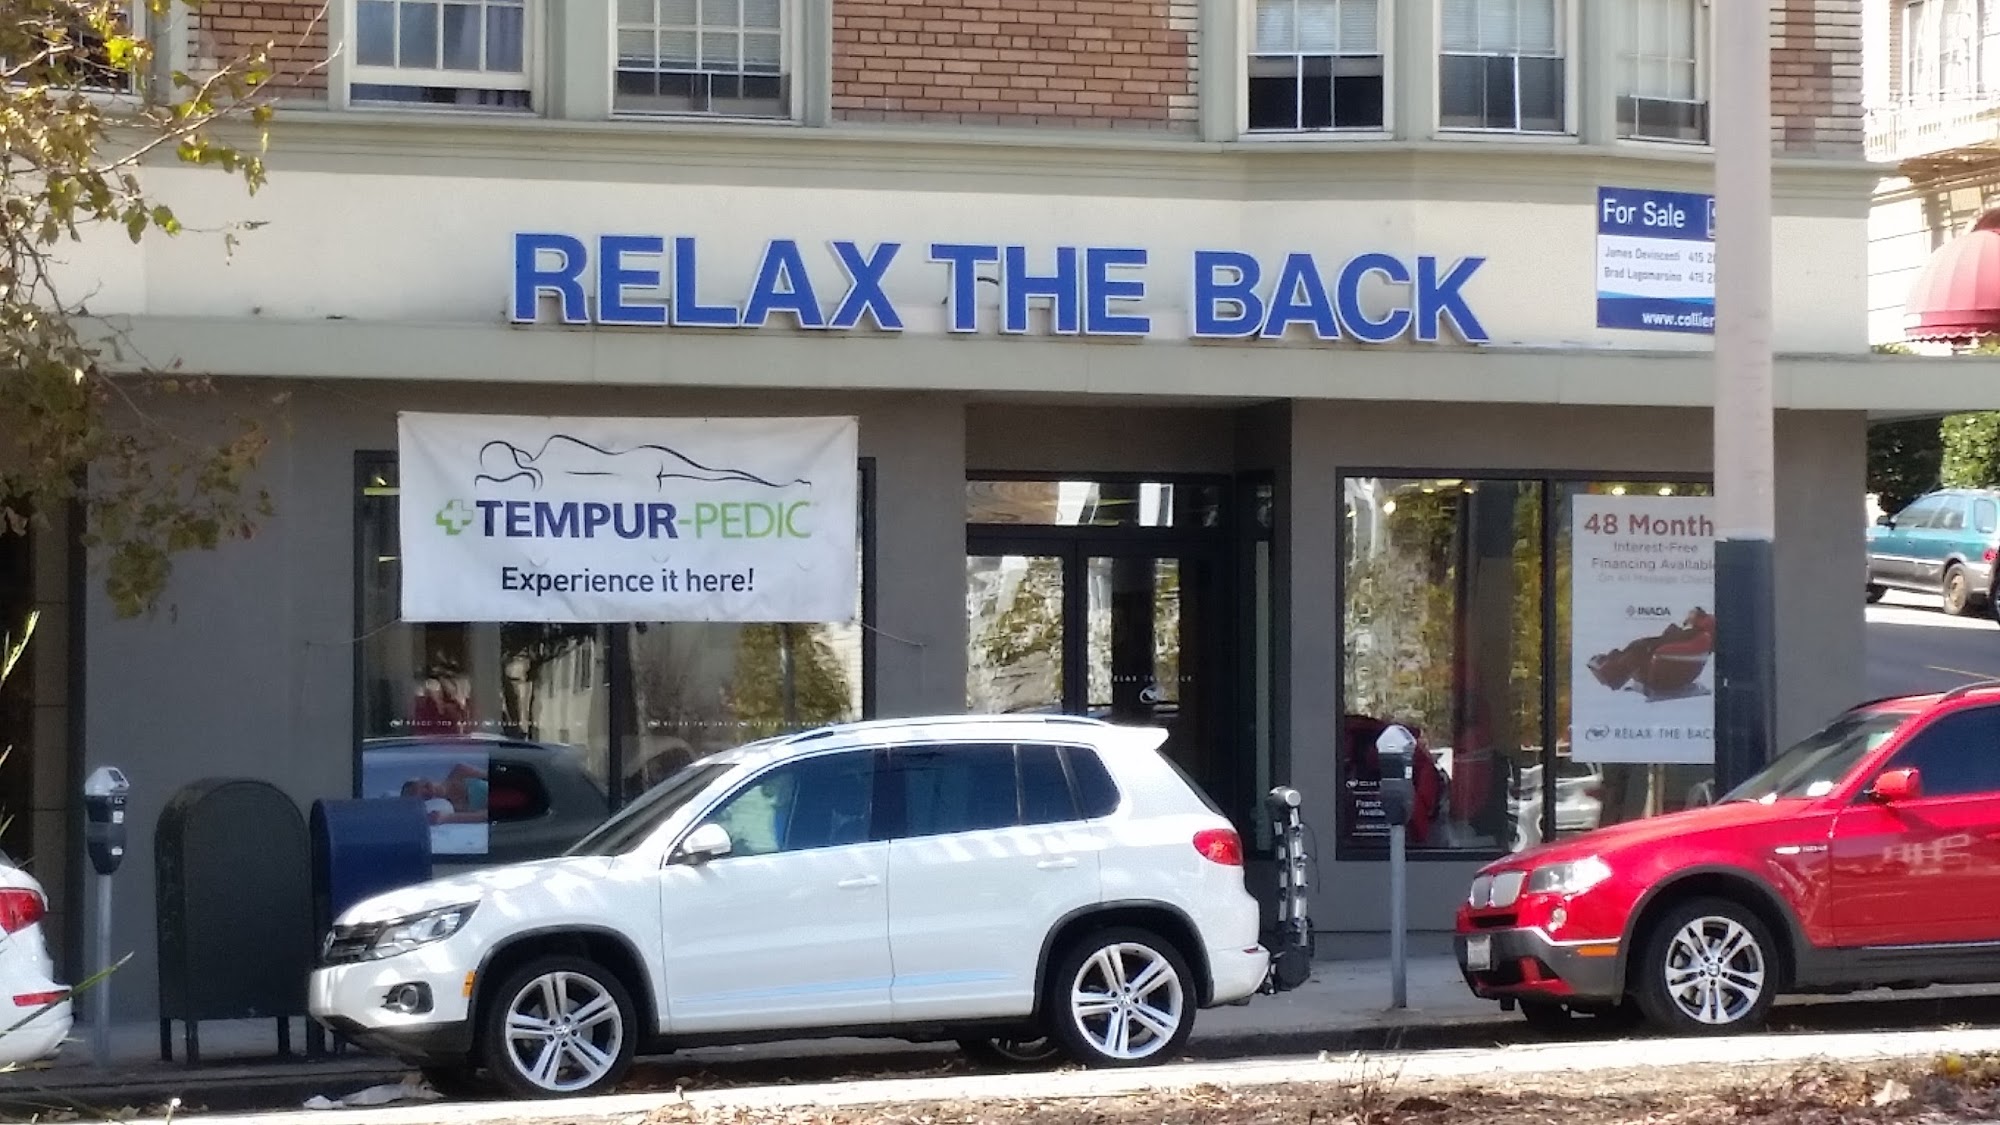 Relax The Back